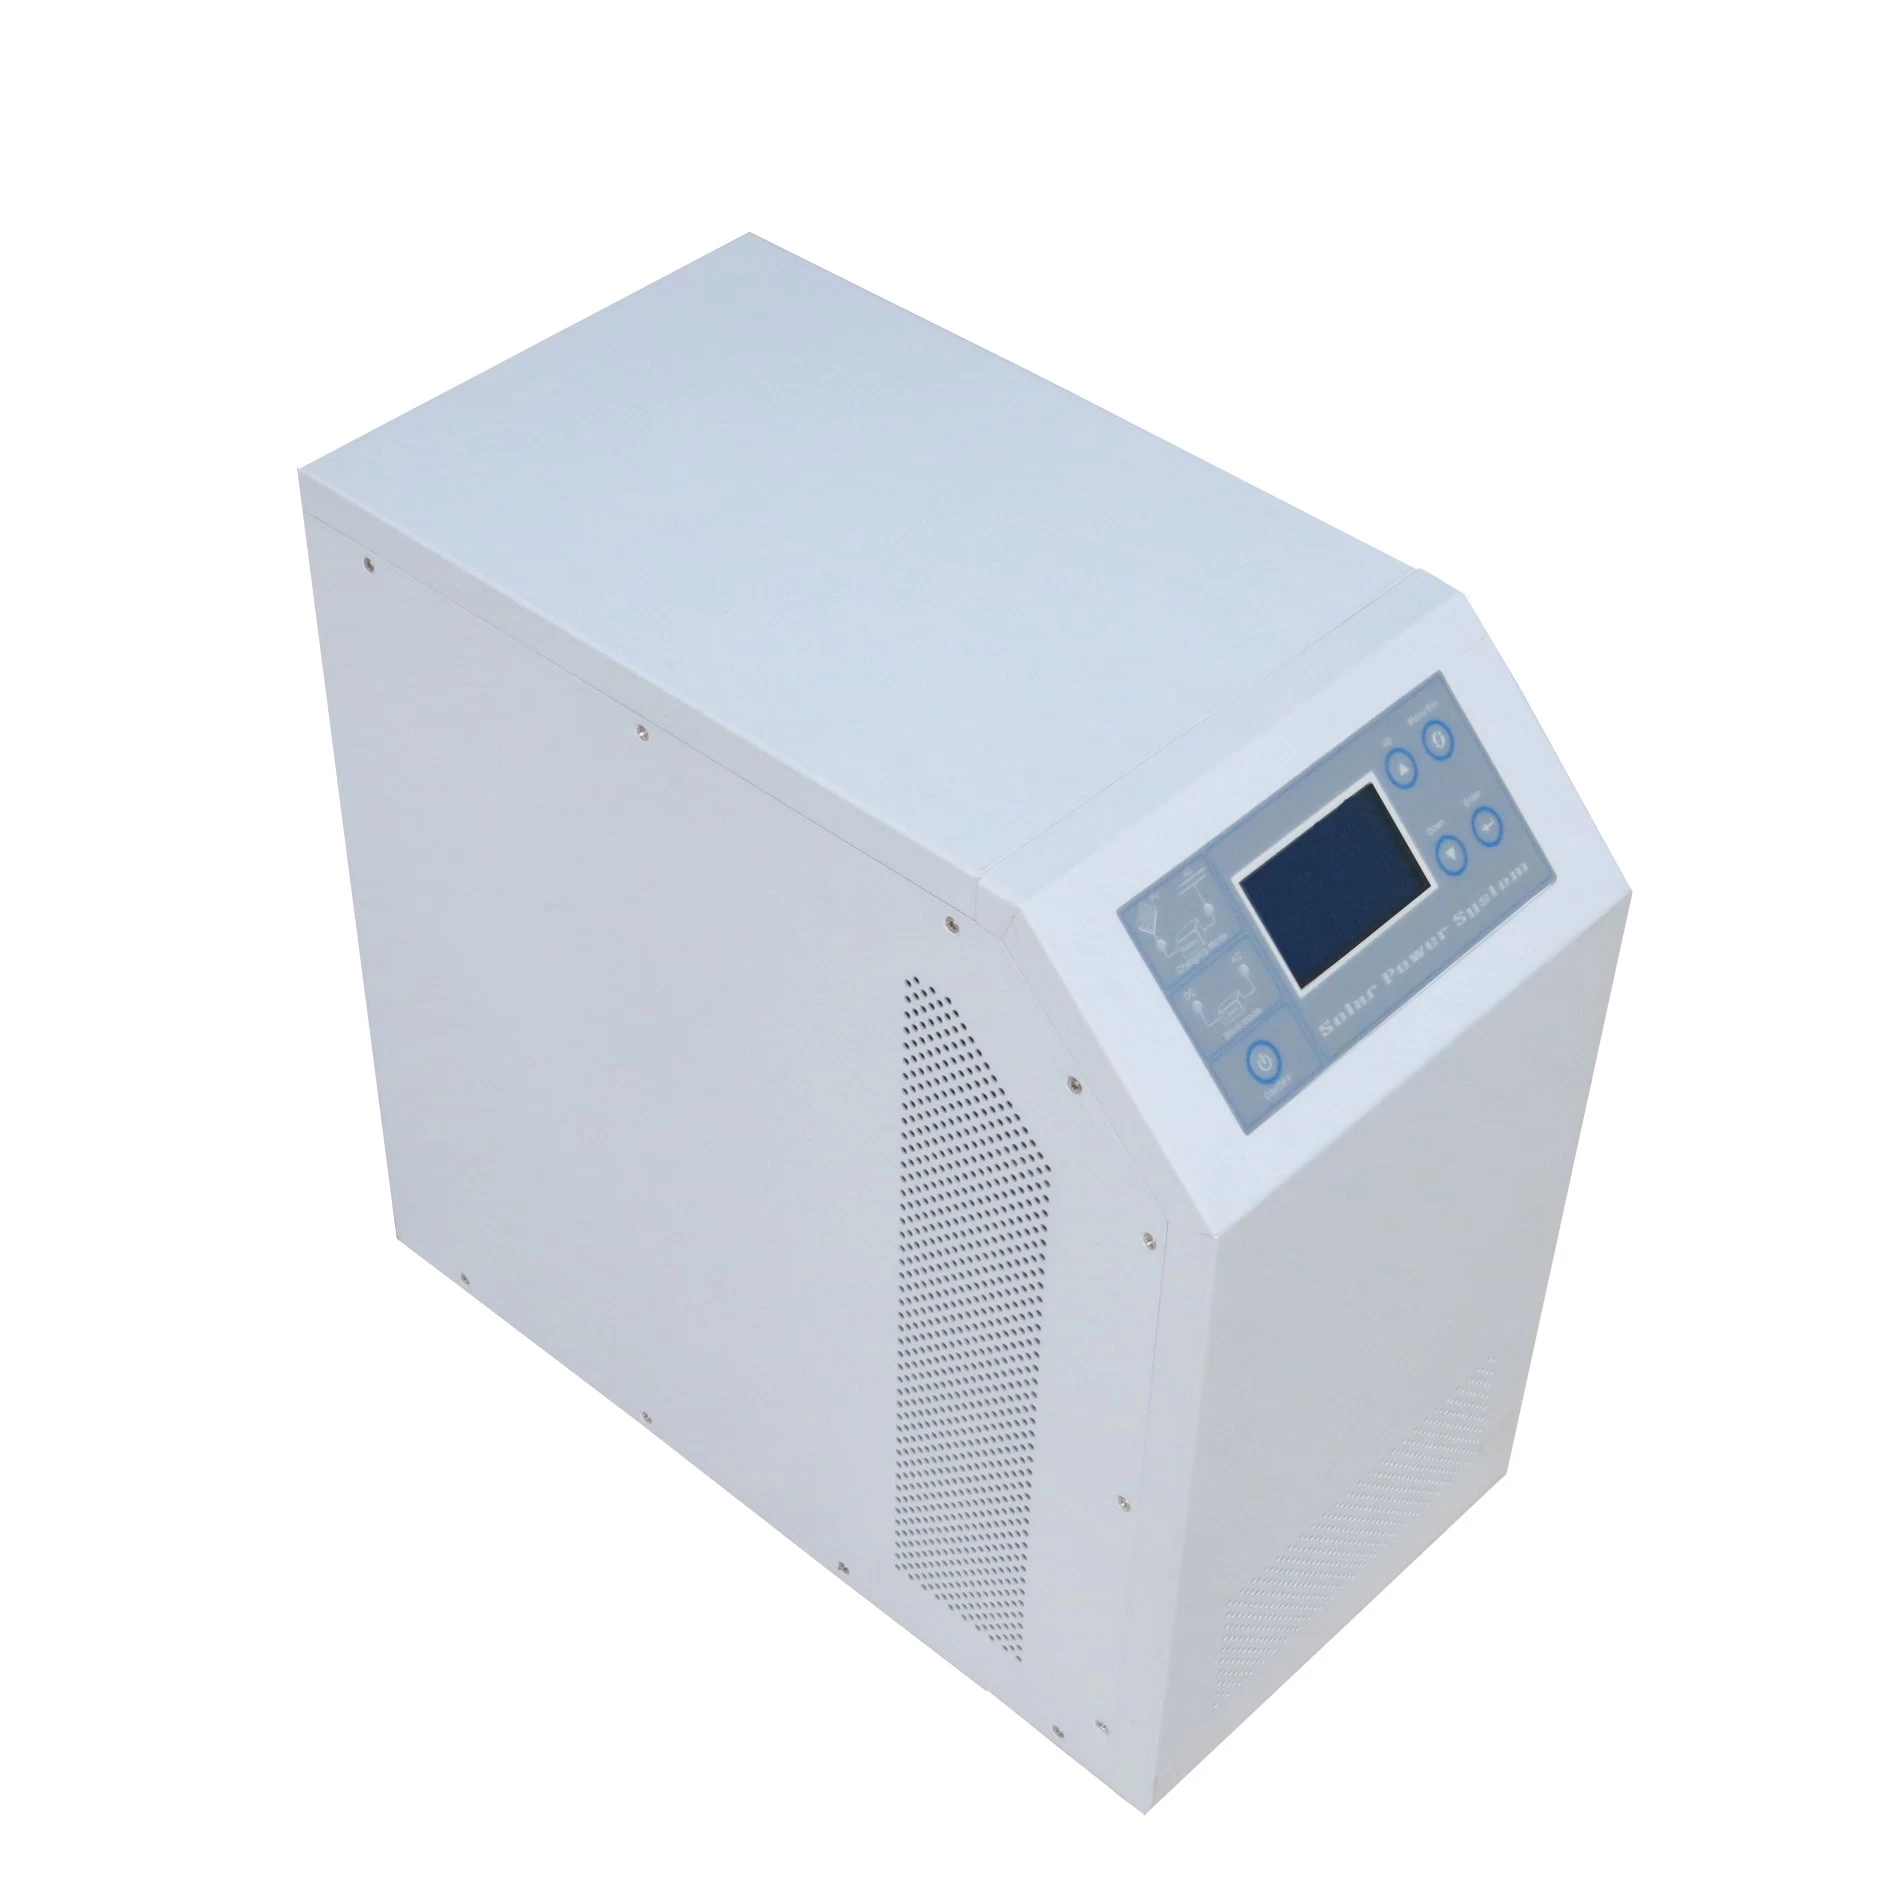 dc 48v to ac 220v 230v 240v 4kw single phase and off-grid dc to ac power inverter with built-in mppt solar charge controller